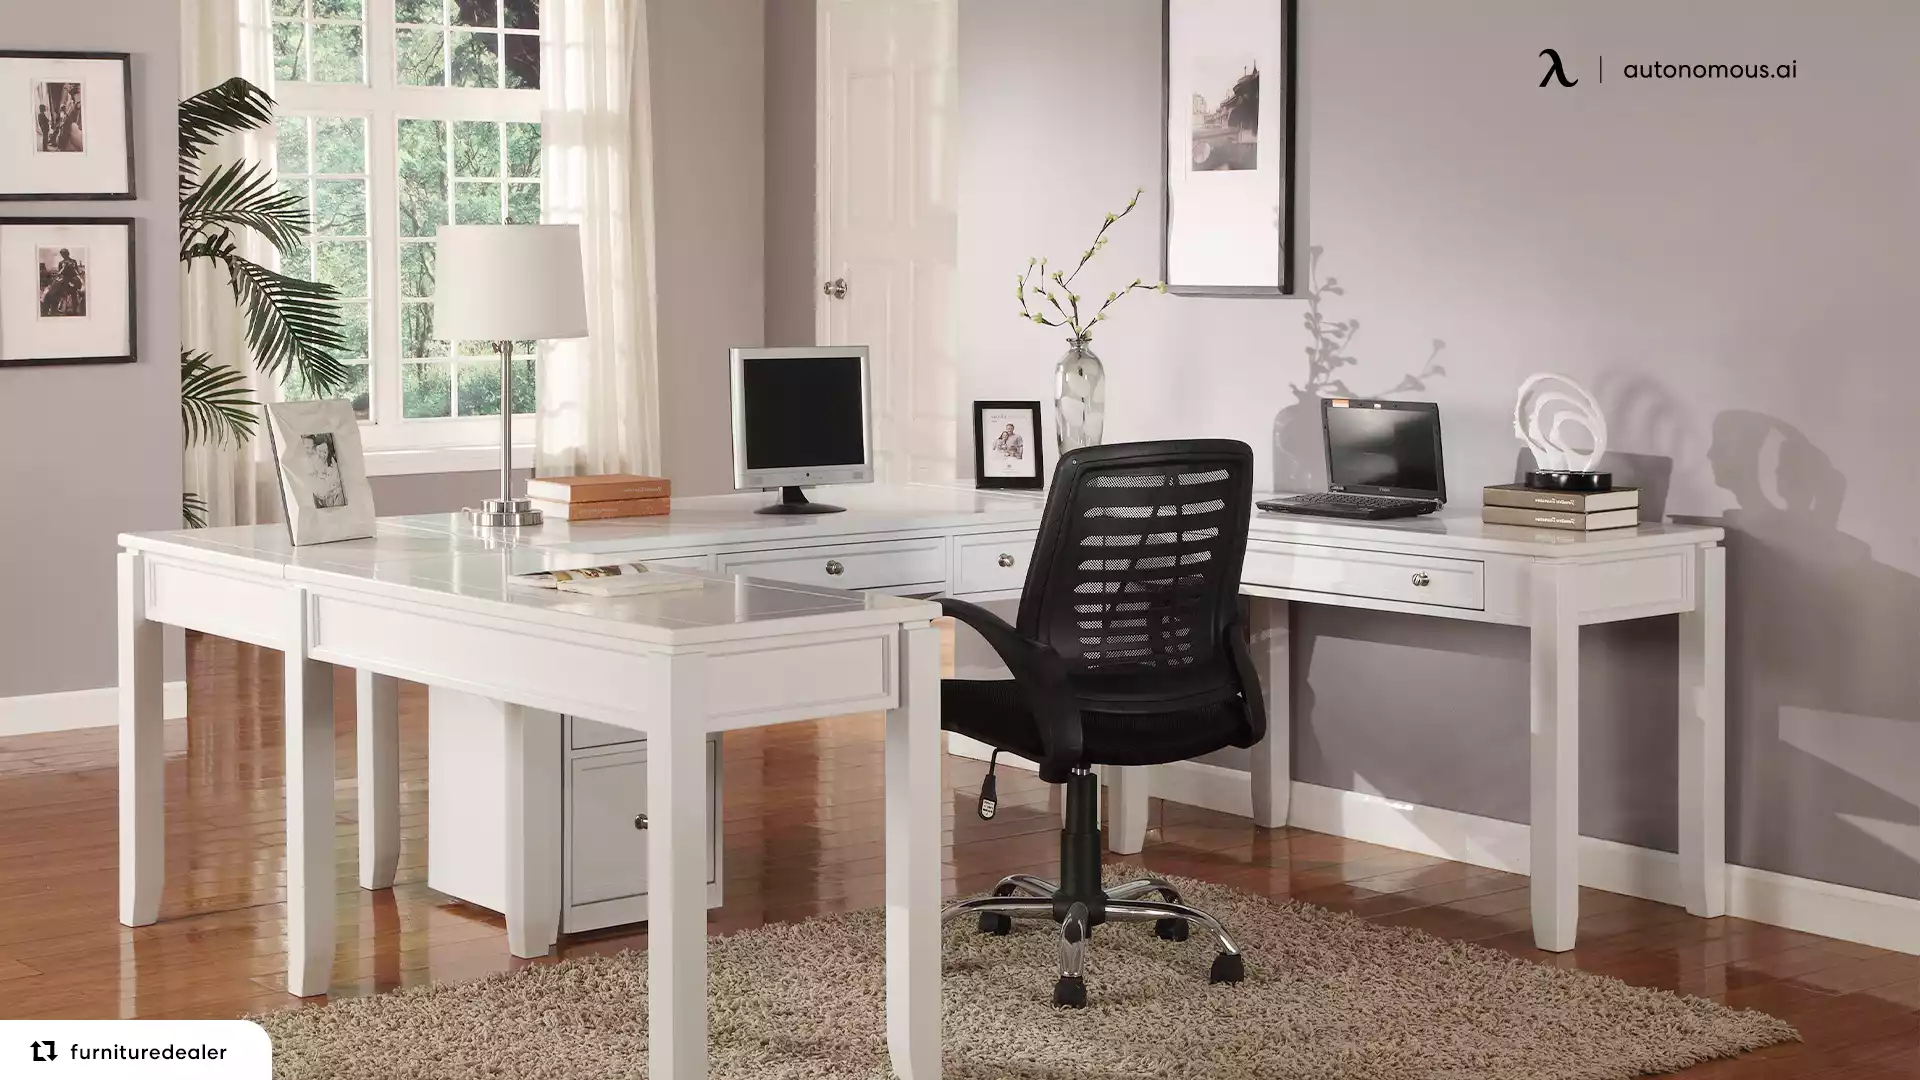 How to Make a Stylish and Attractive U-Shaped Office Layout